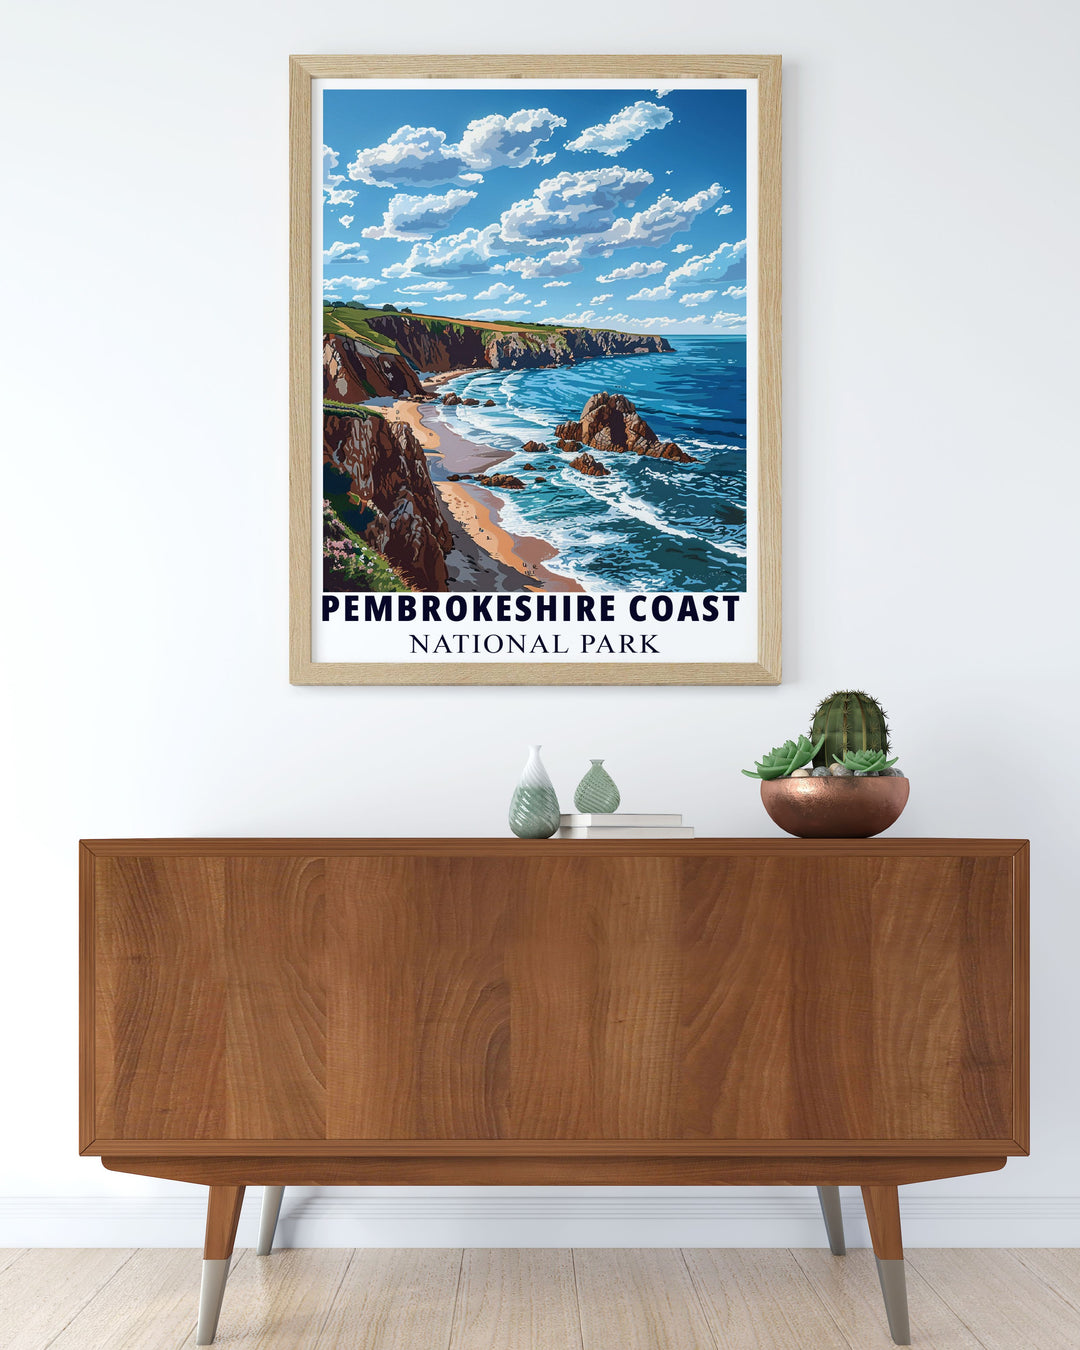 Experience the historical charm of the Pembrokeshire Coast with this detailed art print, highlighting the ancient castles, medieval churches, and historic lighthouses that dot the landscape.